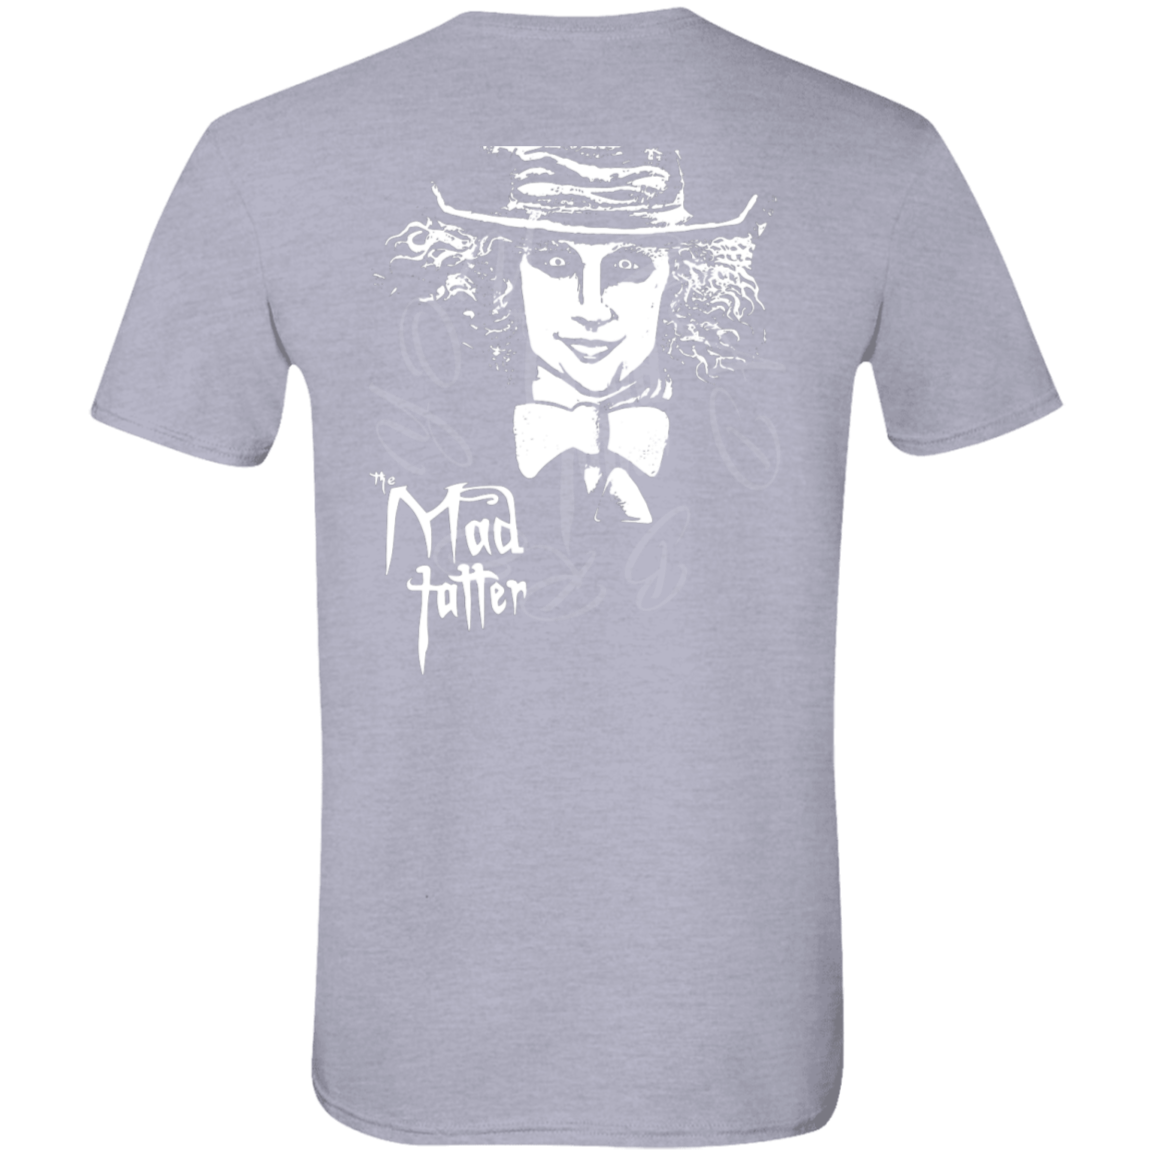 Mad Mural Tatter Softstyle T-Shirt - White Logo